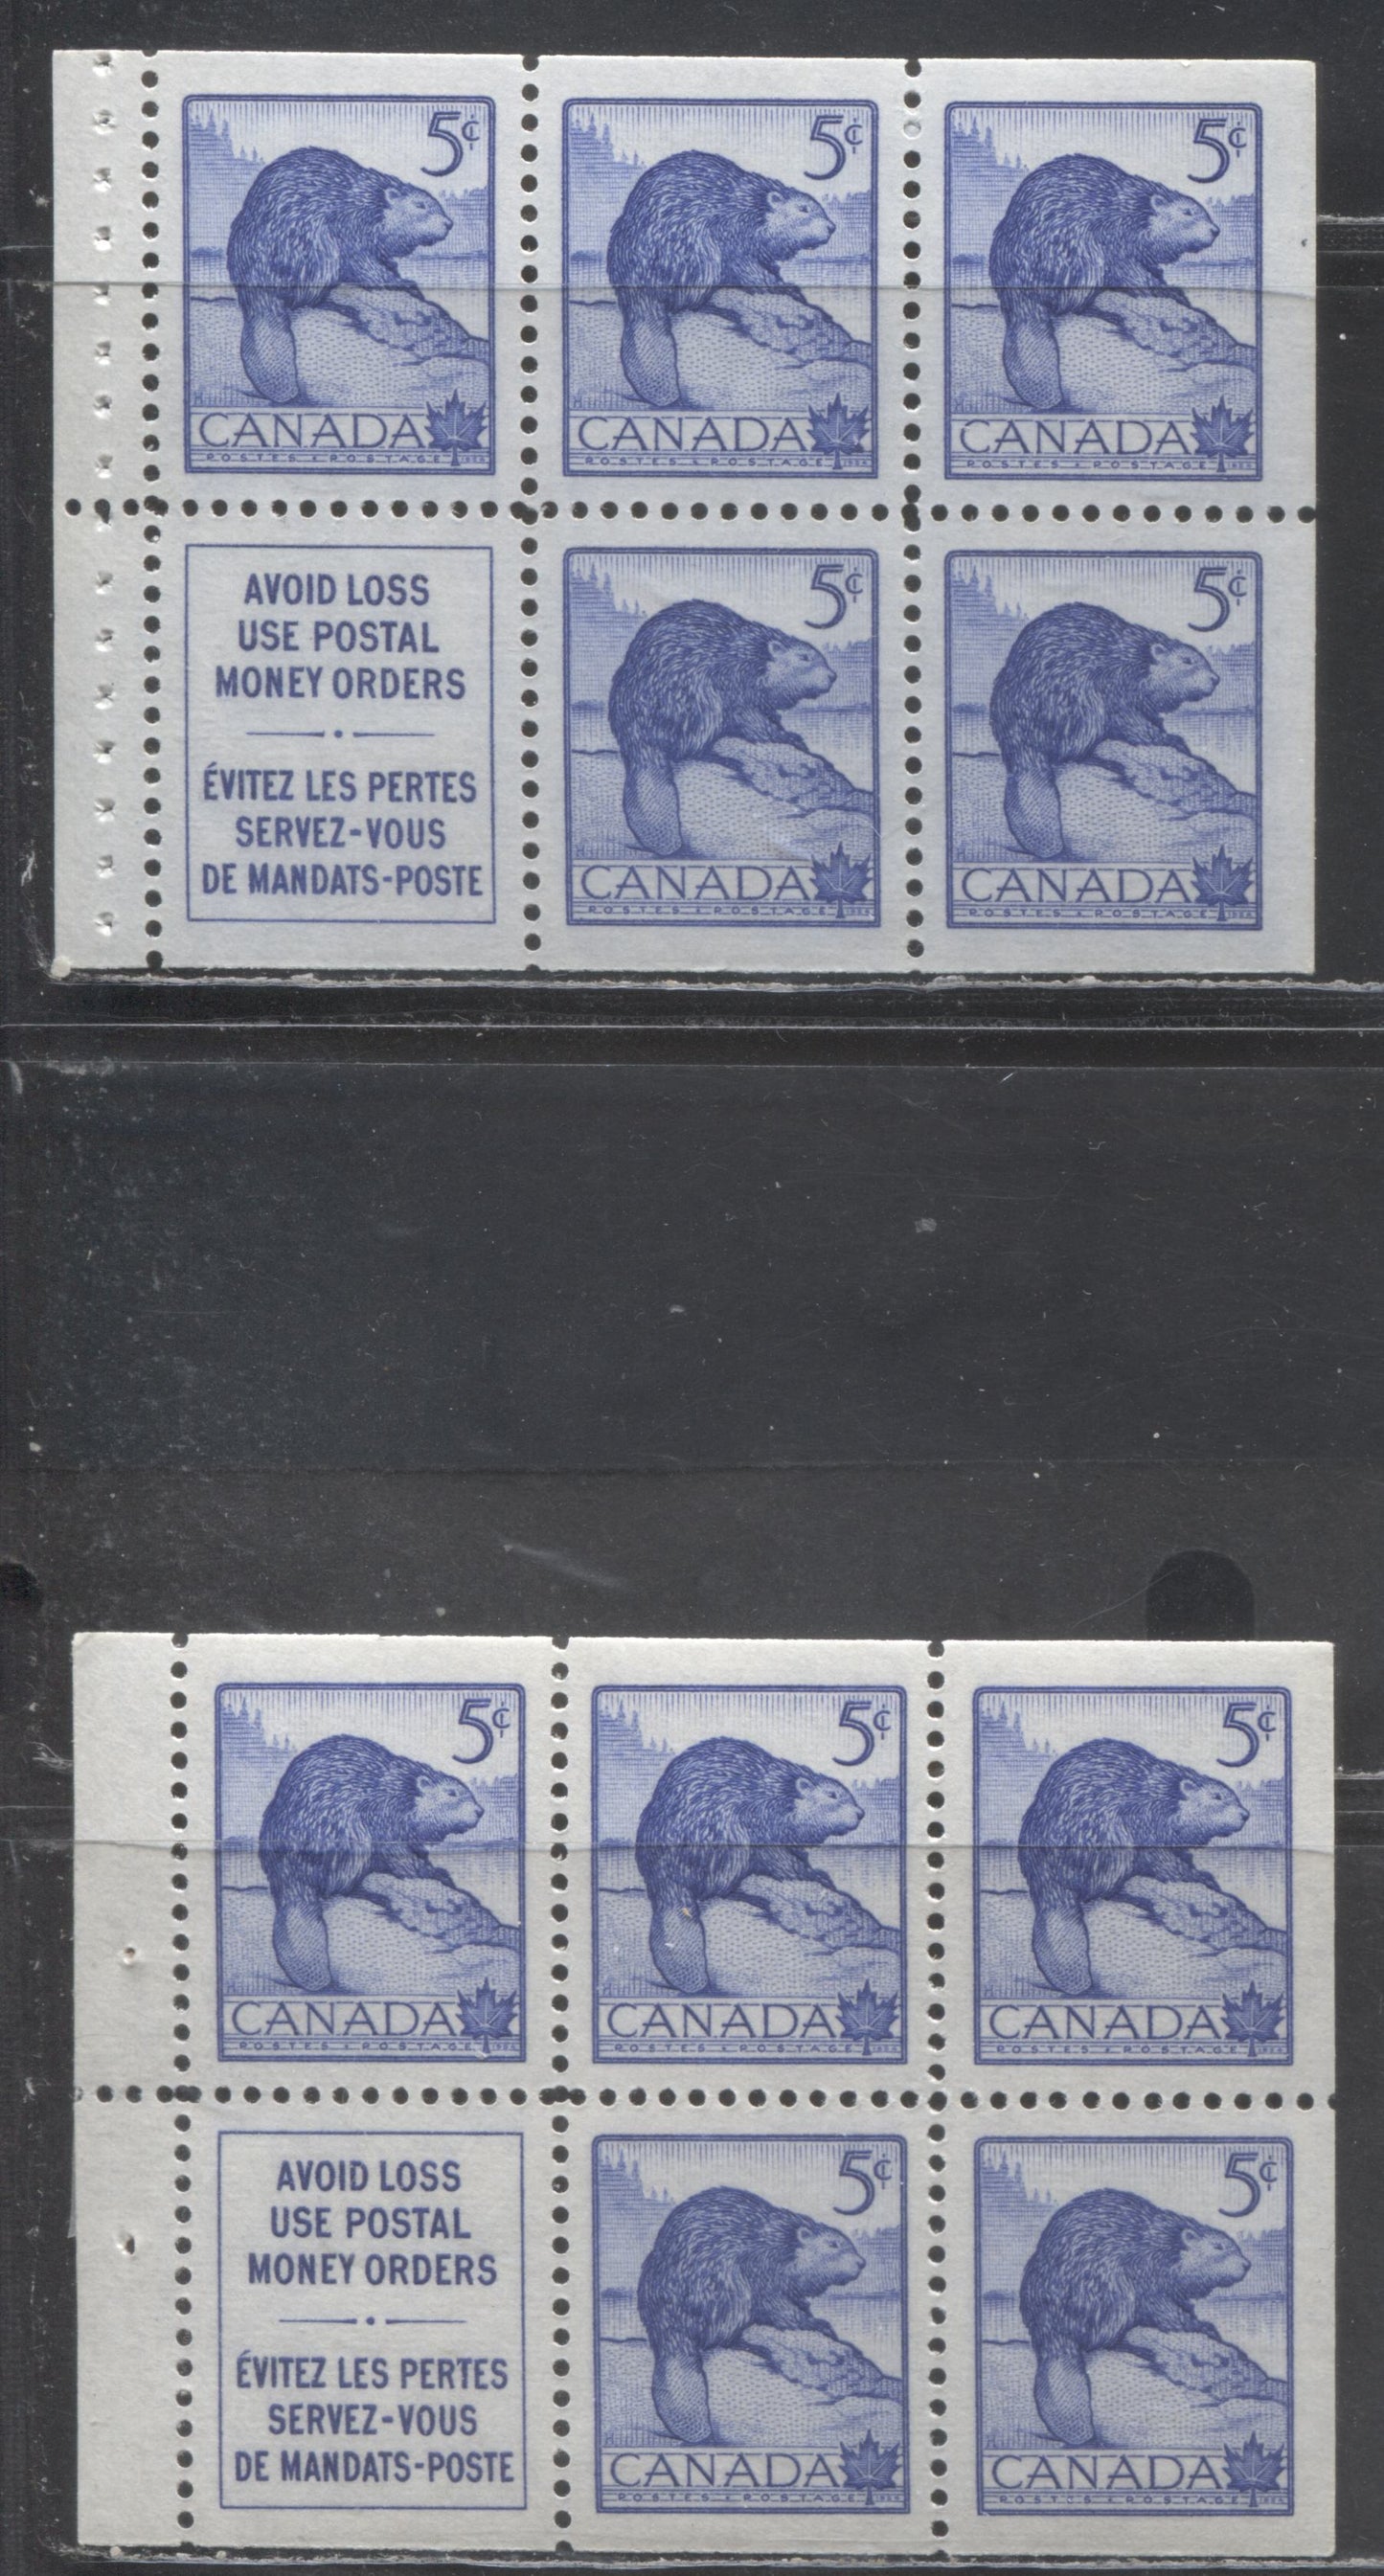 Lot 401 Canada #336a, ai 5c  Deep Ultramarine Beaver, 1954 Wildlife Week Issue, 2 VFNH Booklet Panes of 5 + Label,Horizontal Ribbed Paper, Yellowish Cream Semi-Gloss Gum, Staple & Stitch Holes In Tabs